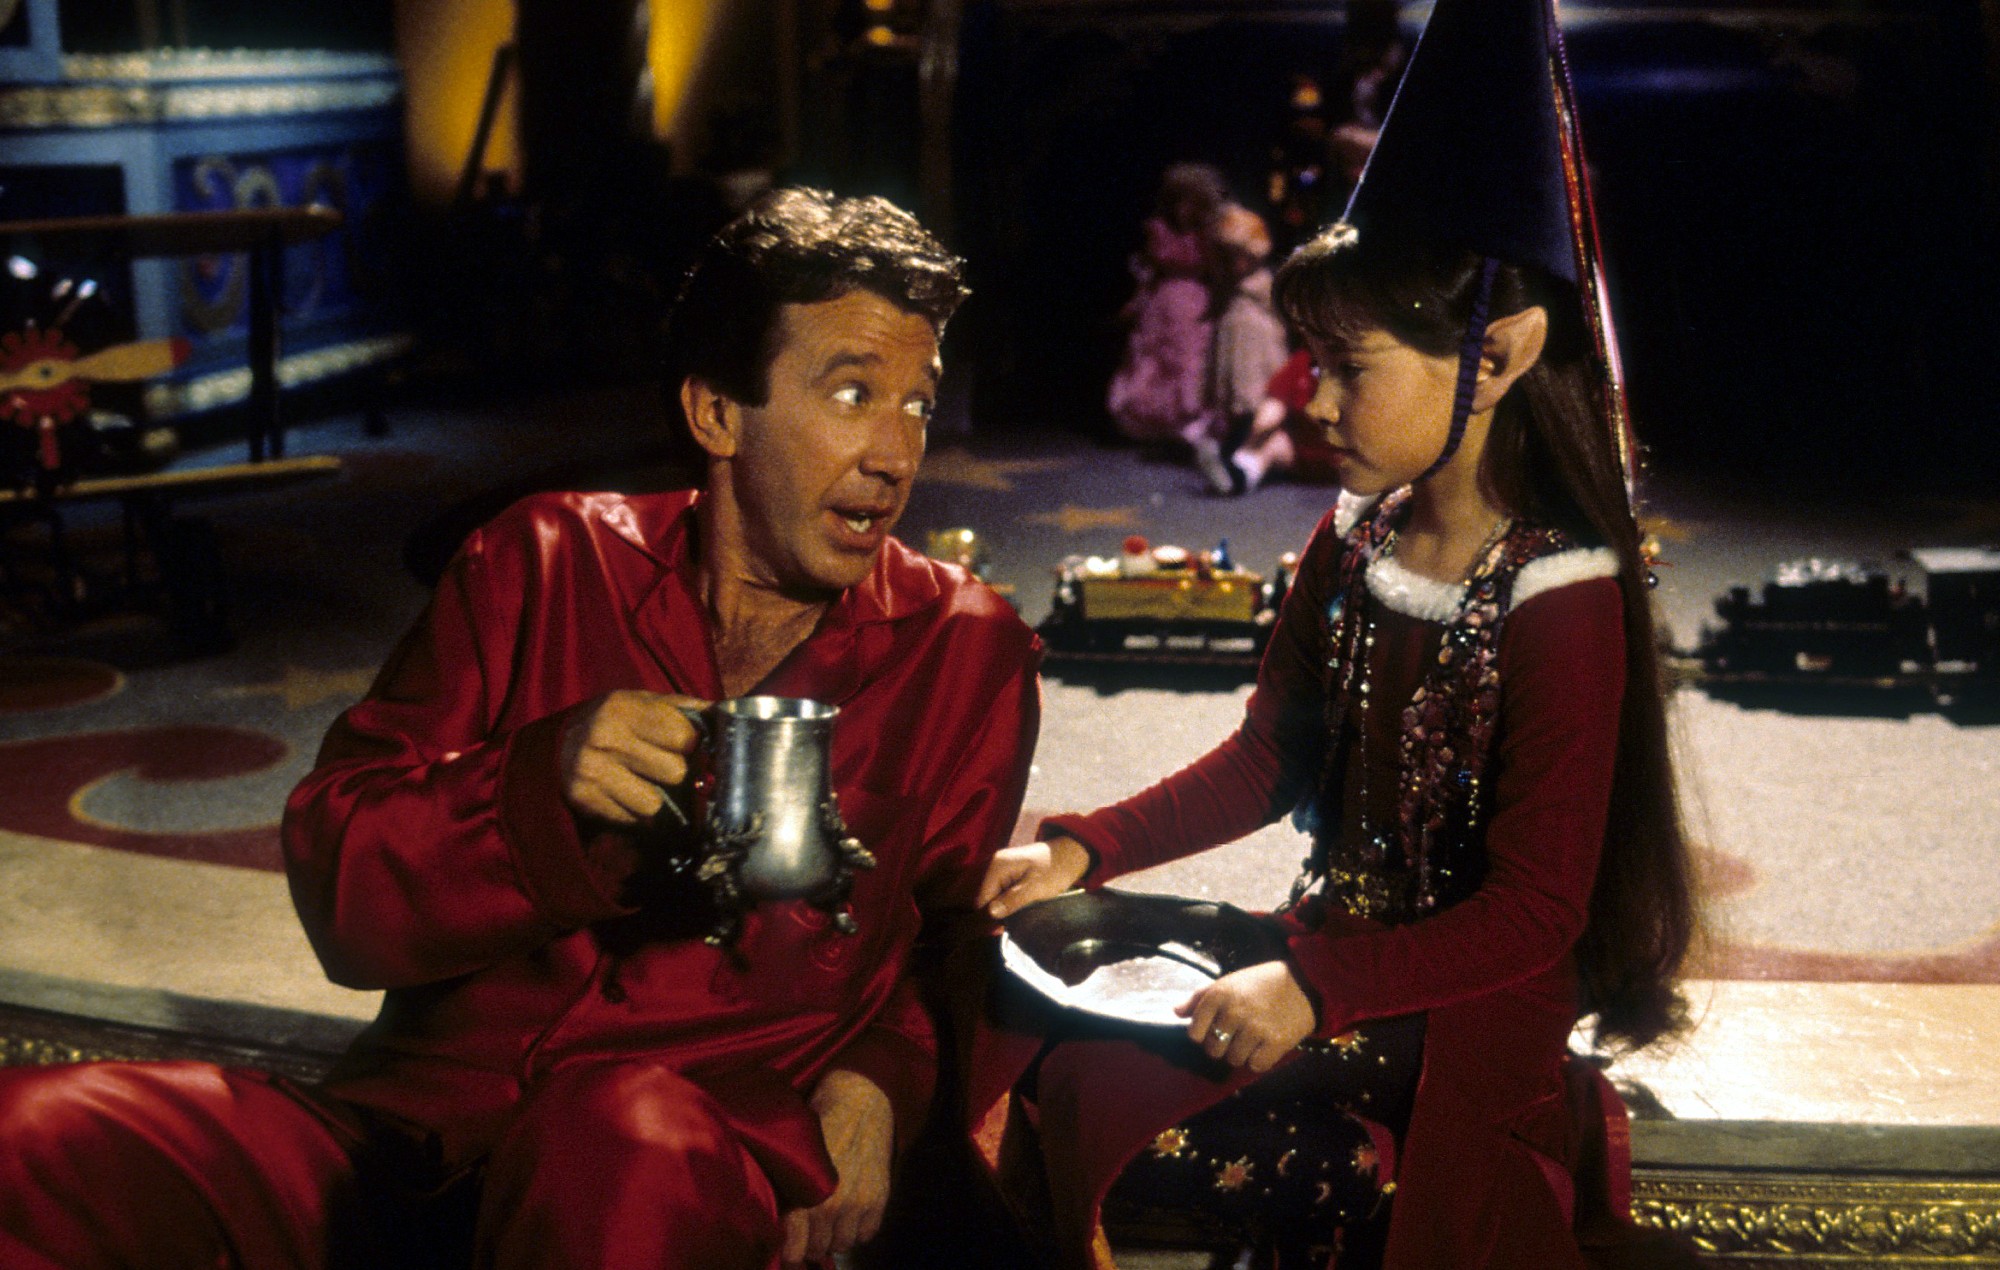 Tim Allen in 1994's 'The Santa Clause'. Credit: Walt Disney Pictures/Getty Images